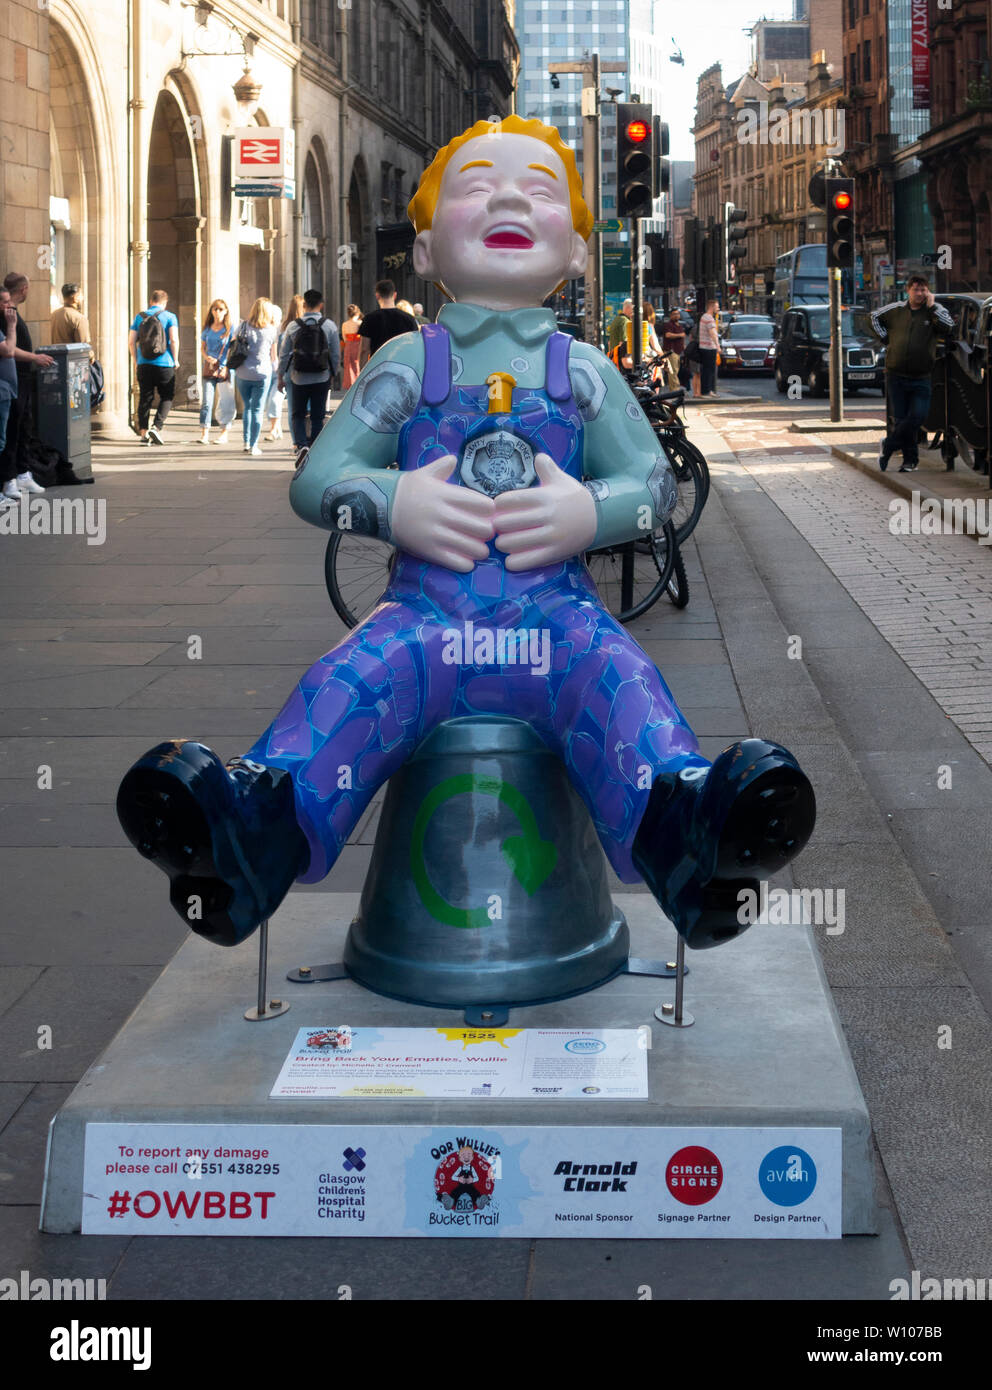 Bring Back Your Empties, Wullie by Michelle C Cranwell, part of the Oor Wullie Big Bucket Trail 2019. Glasgow, Scotland Stock Photo